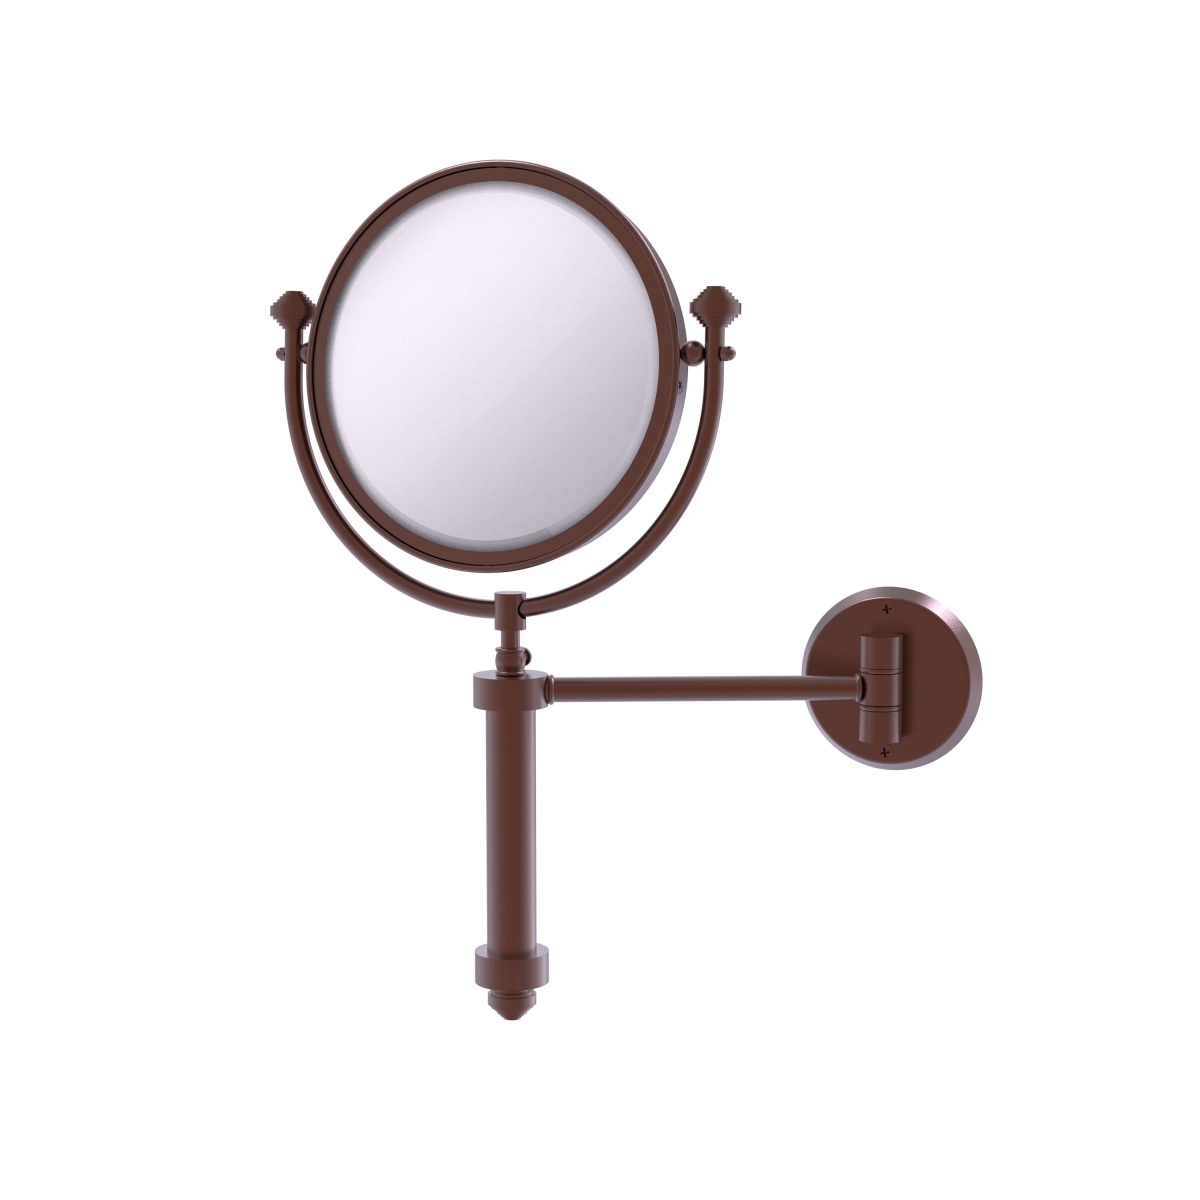 SB-4-2X-CA 8 in. dia. Southbeach Collection Wall Mounted Make-Up Mirror with 2X Magnification, Antique Copper -  Allied Brass, SB-4/2X-CA